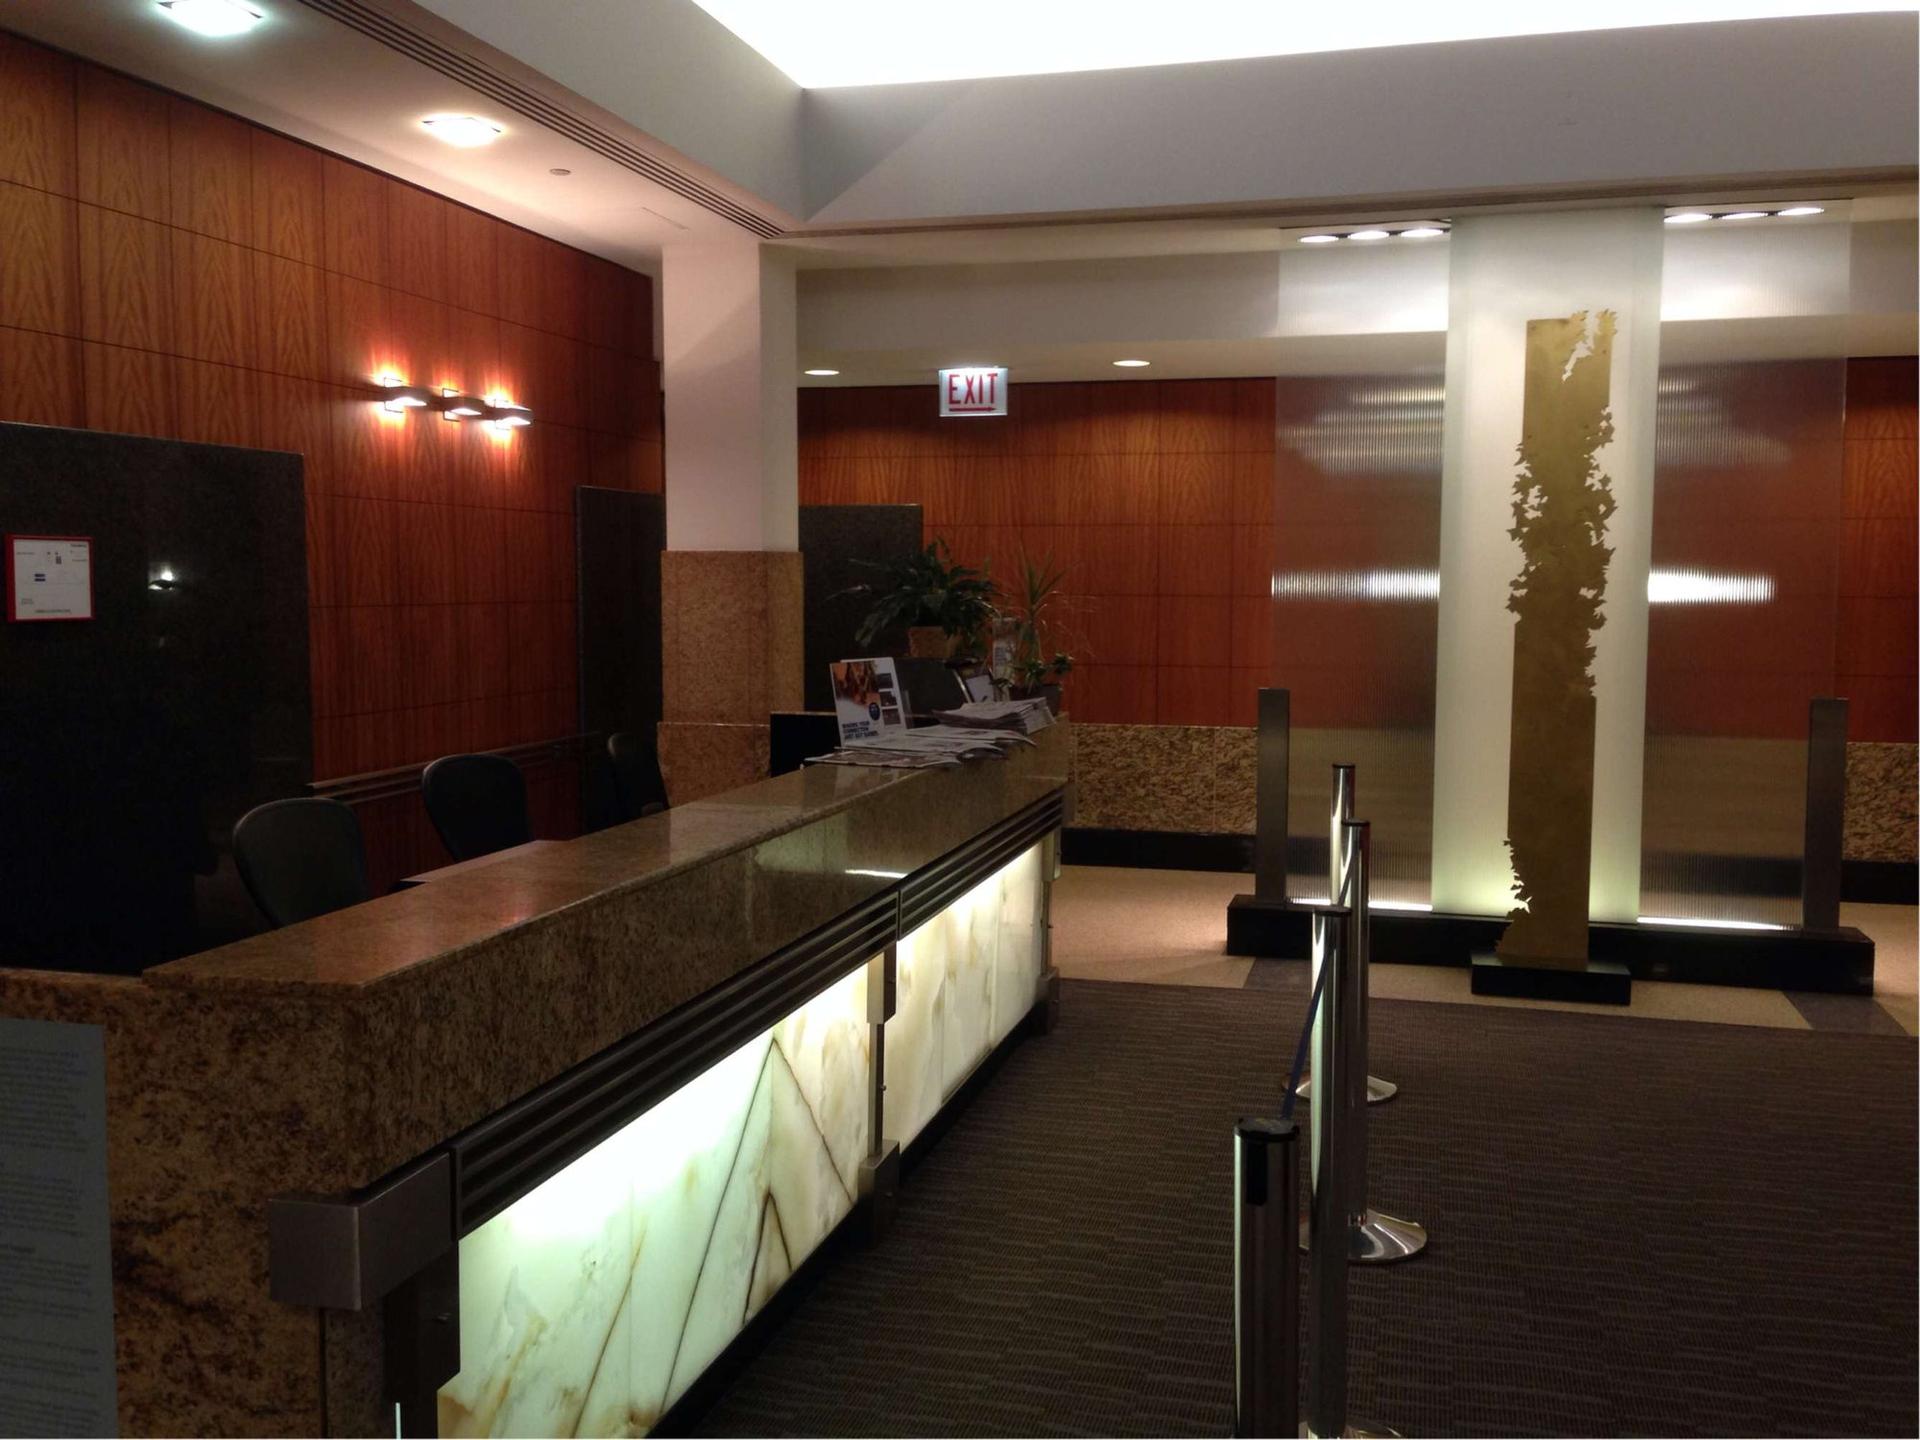 American Airlines Admirals Club image 8 of 50